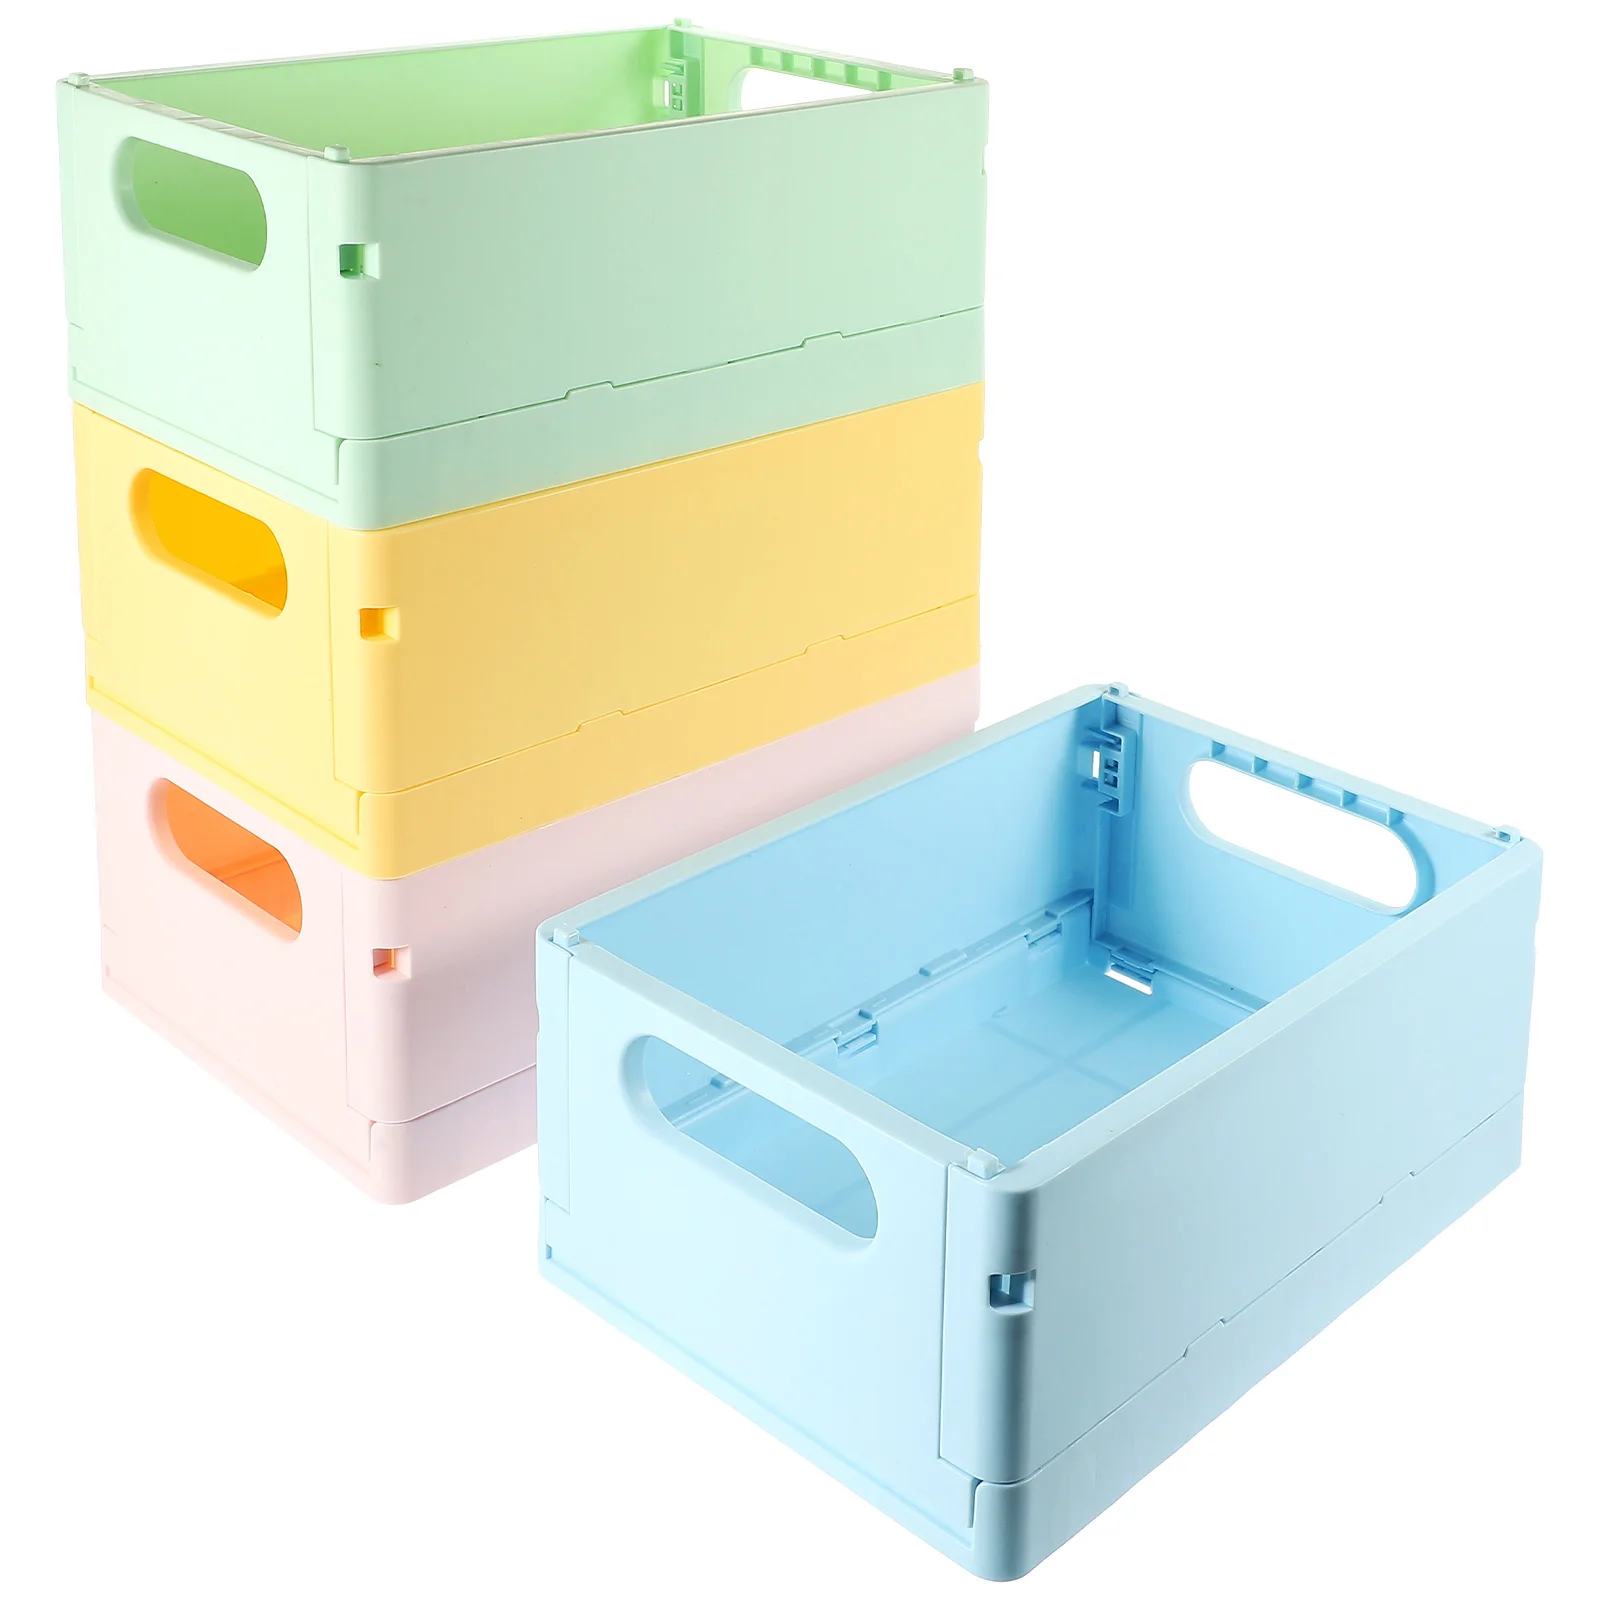 

Sundries Organizers Cube Storage Bin Desk Bins Collapsible Crate Stackable Case Women Cosmetics Home Use Creative Tabletop